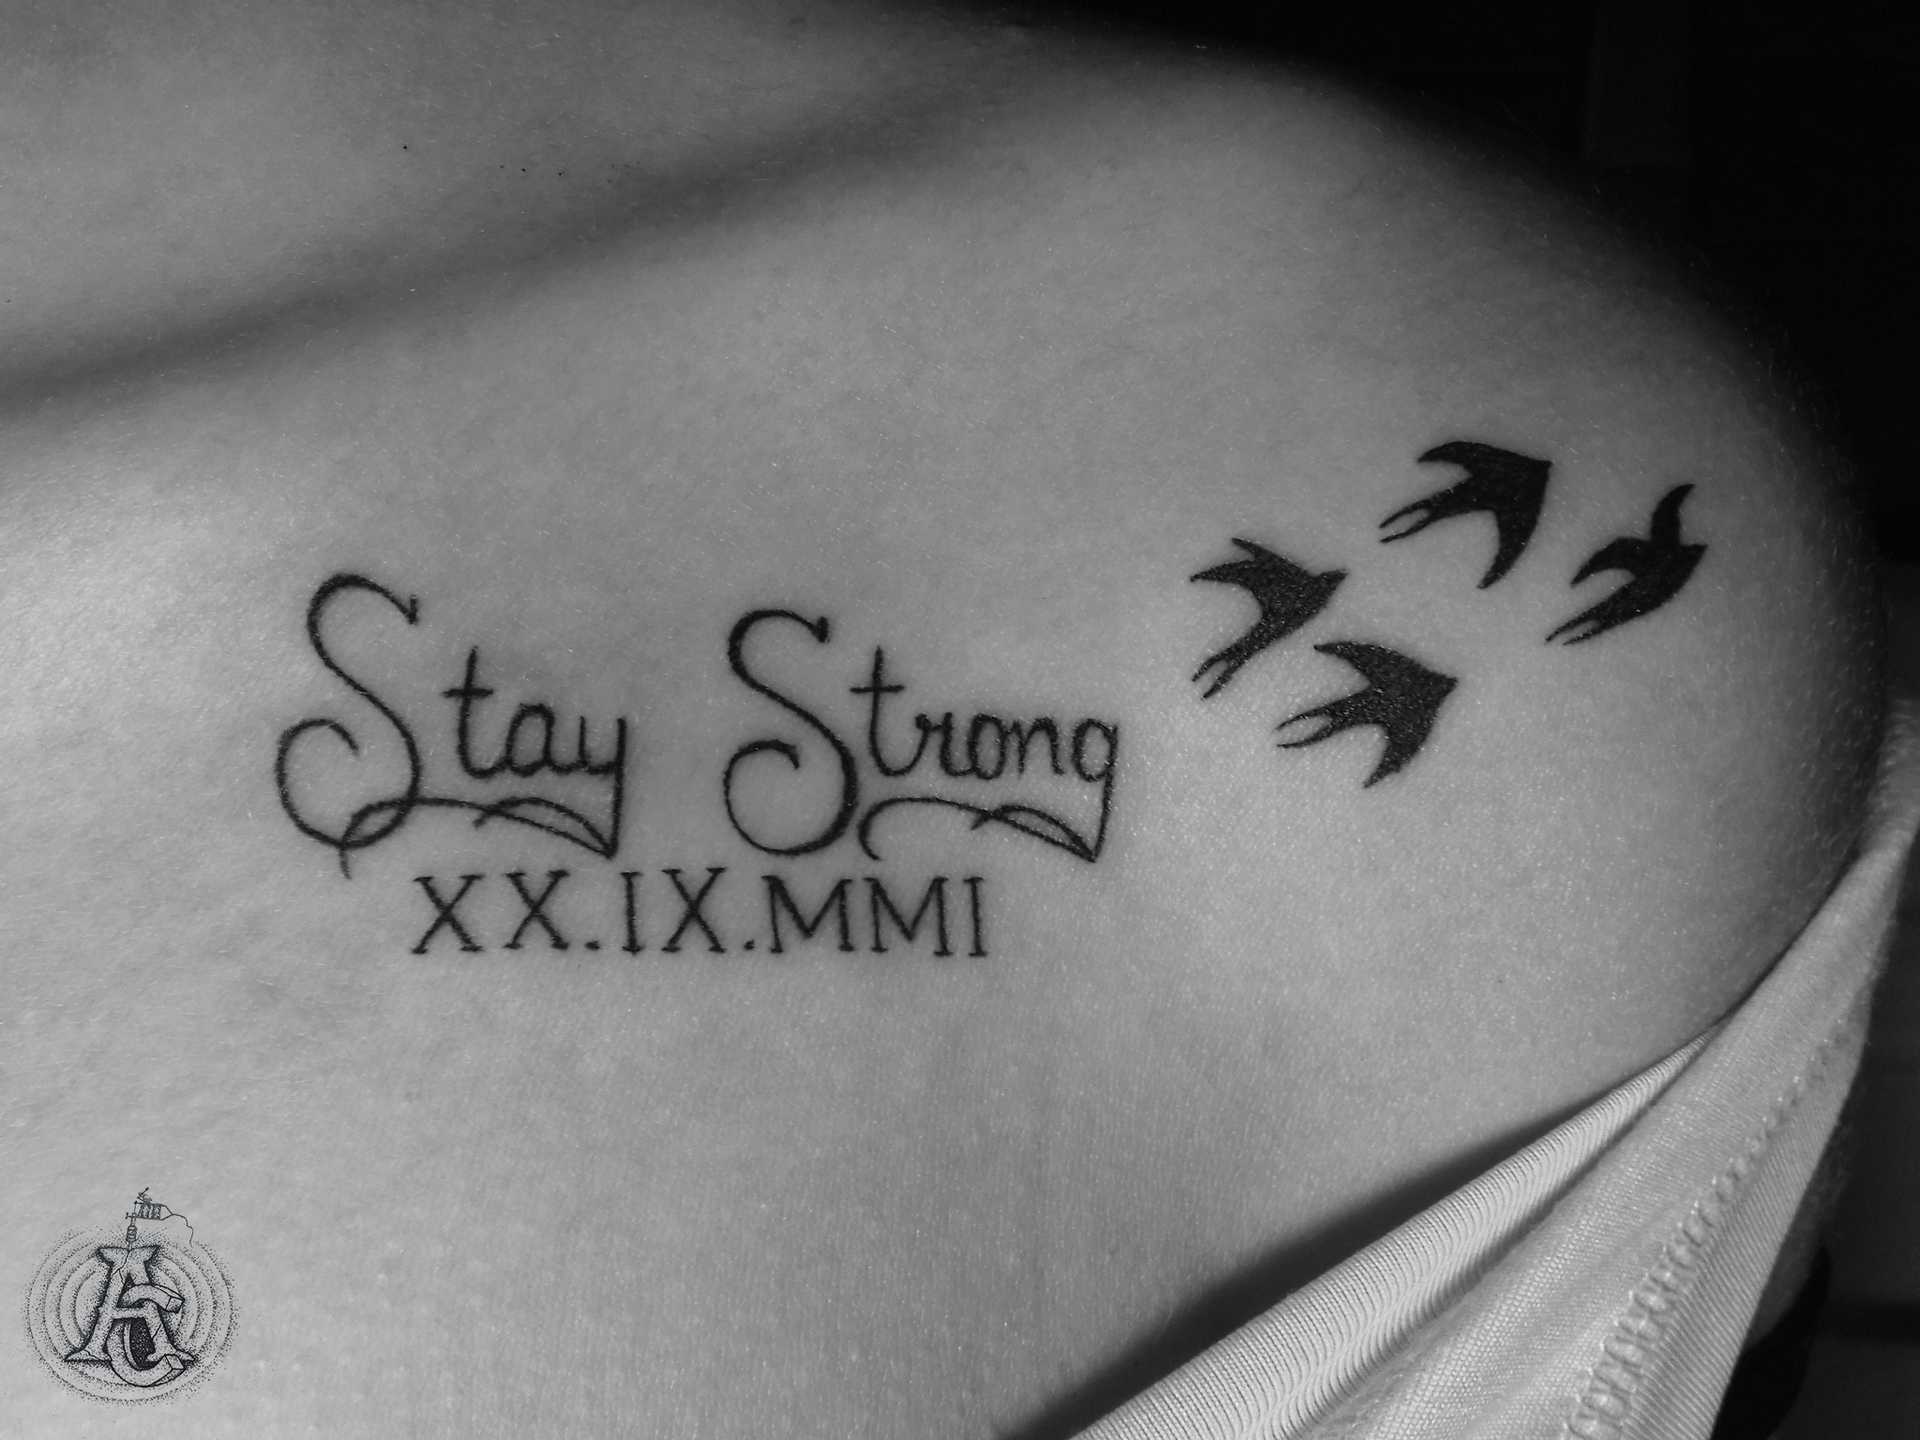 Stay strong upclose